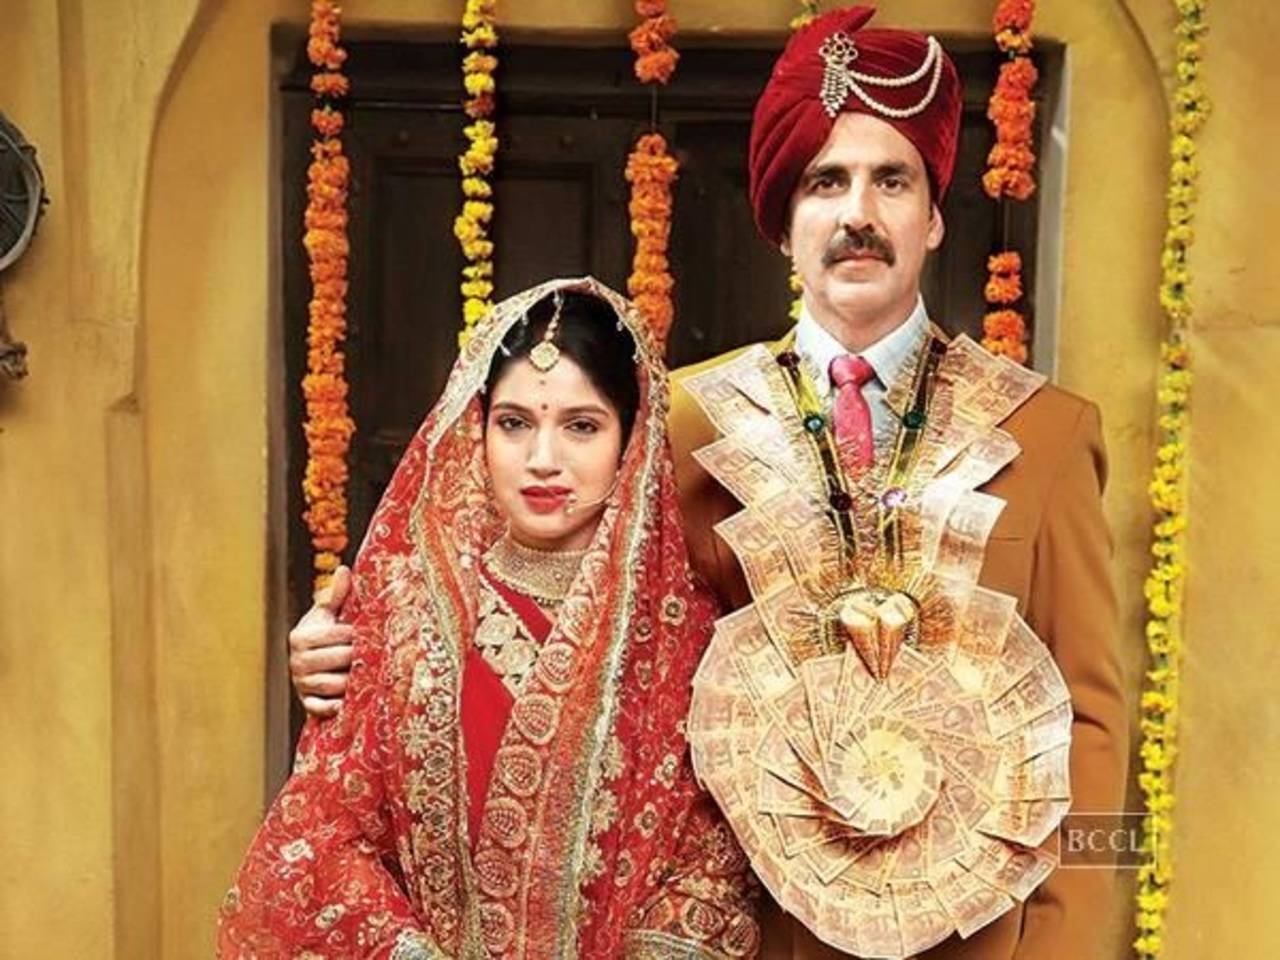 Watch: Kumar and Bhumi Pednekar share a great off-screen chemistry this behind-the-scenes from 'Toilet: Ek Prem Katha' | Hindi Movie News - Times of India